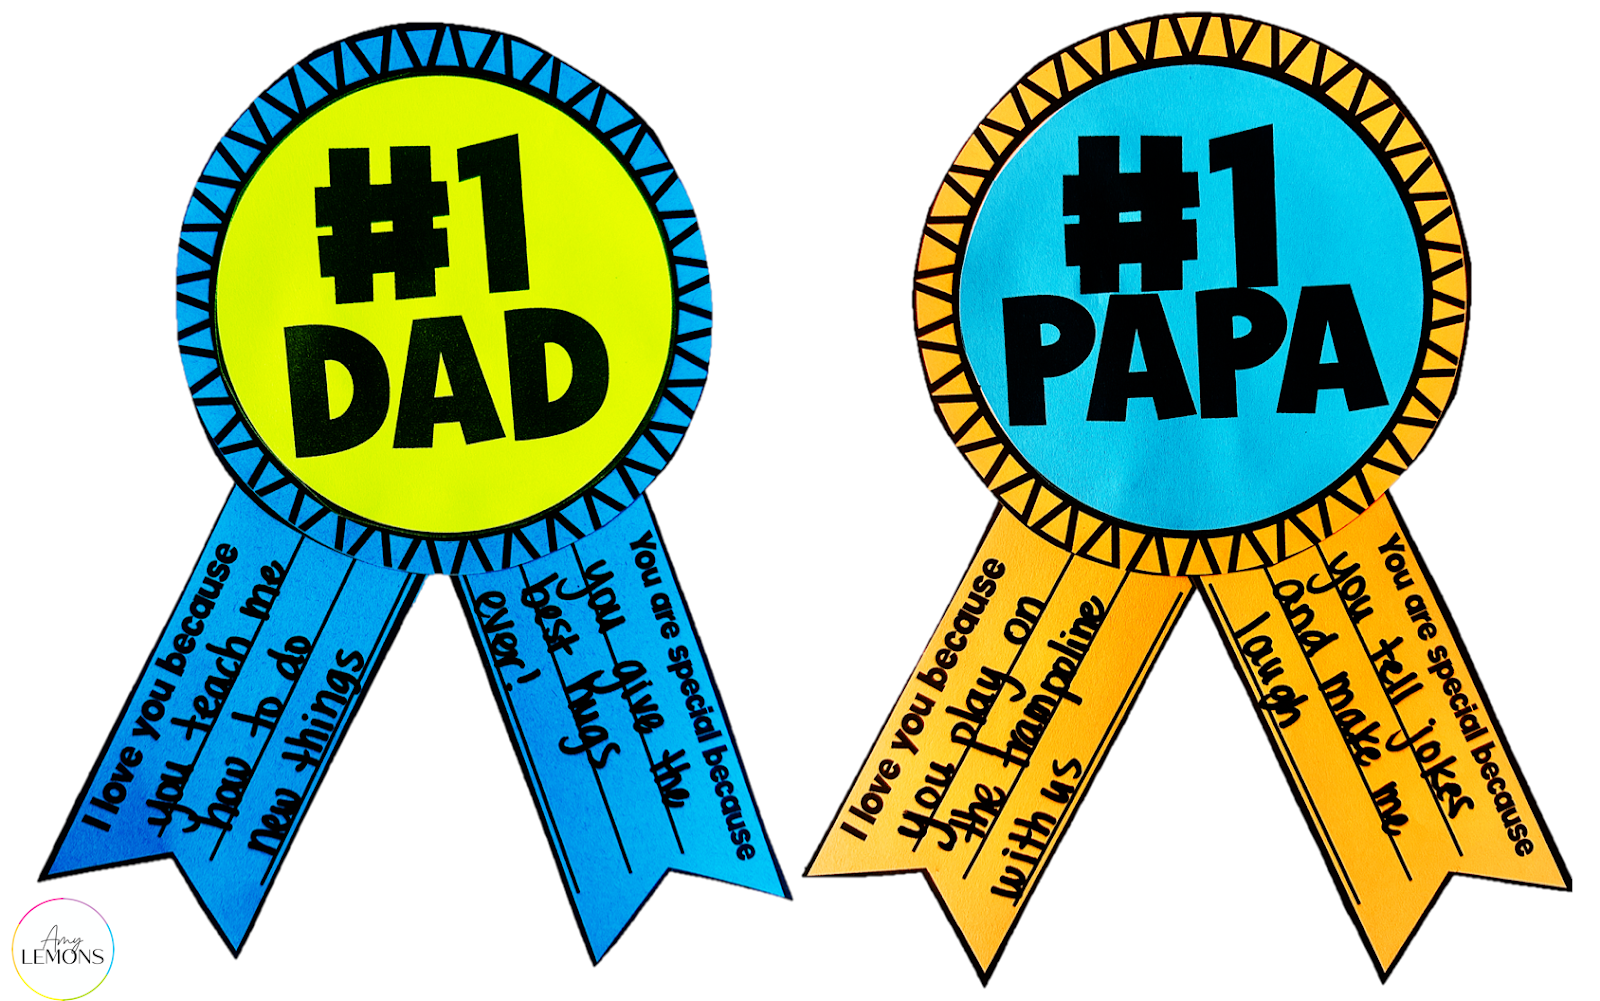 Father's Day student gift with a #1 dad ribbon writing activity.